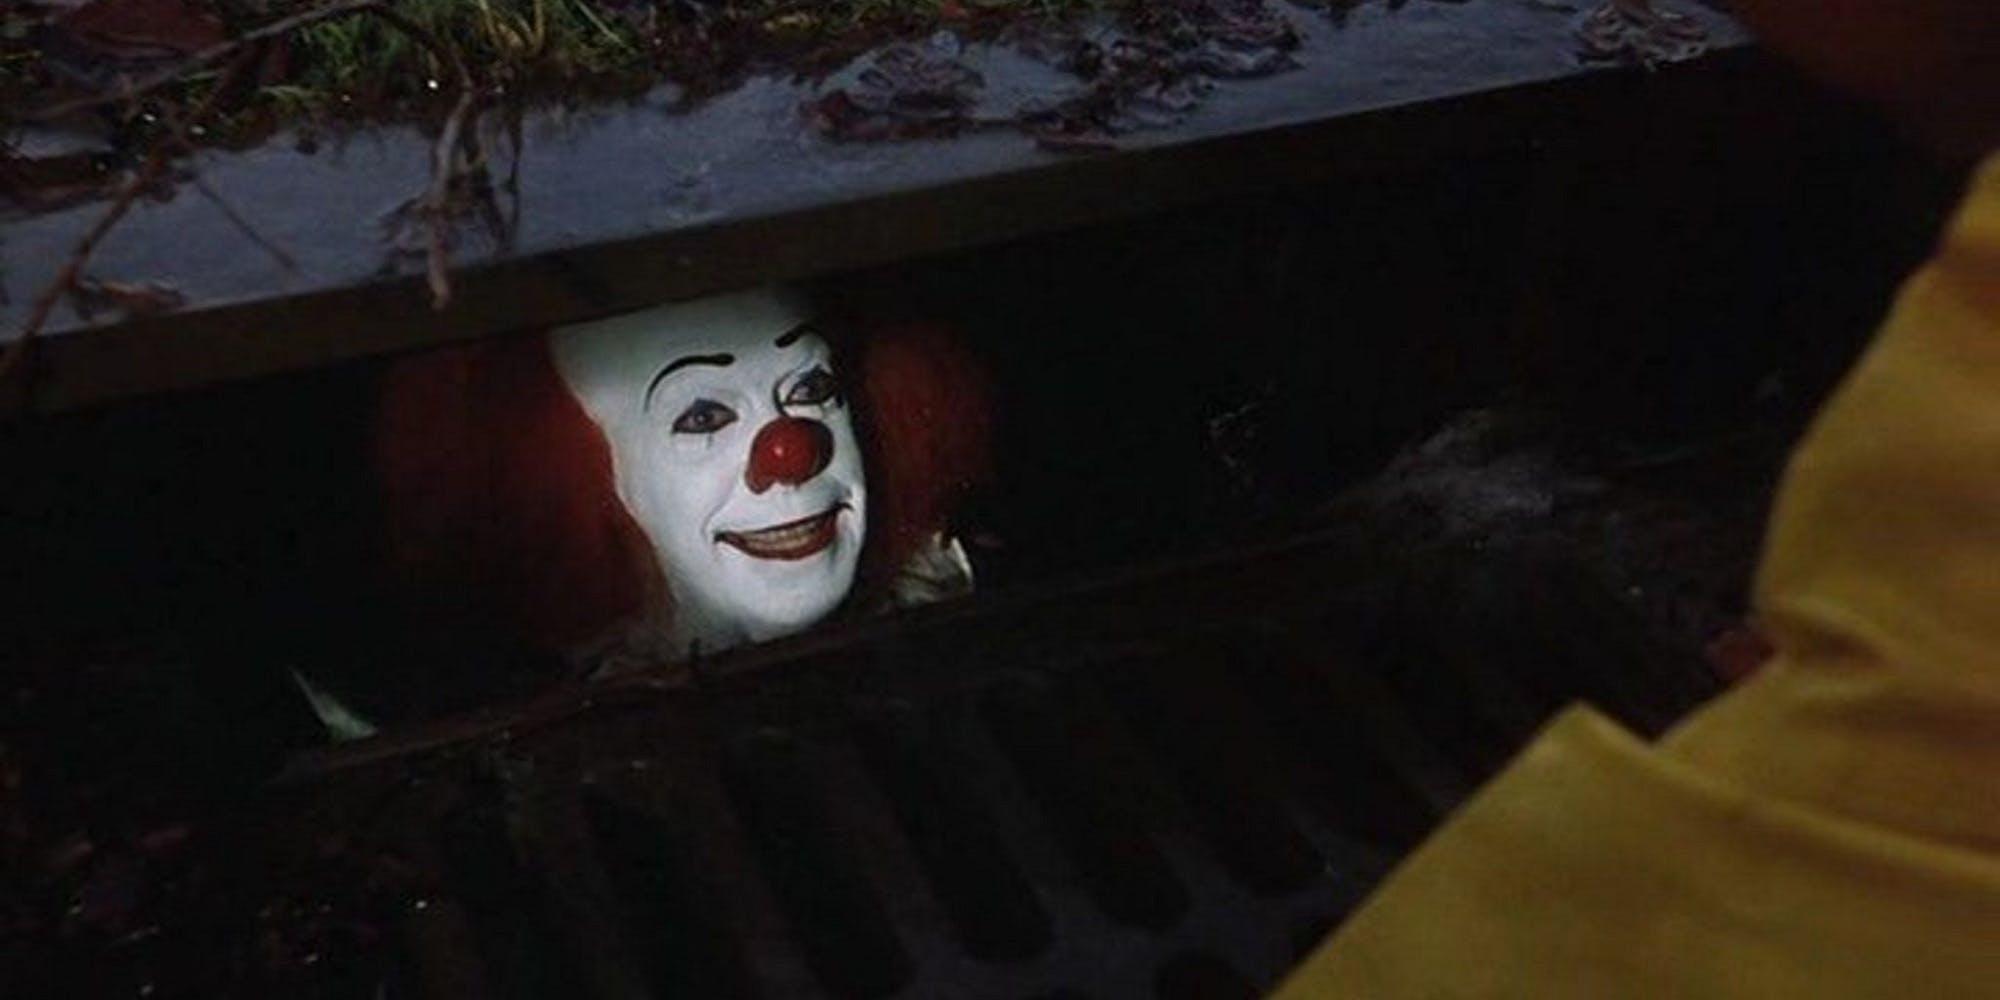 38+ Why Does Pennywise Live In The Sewer | AssyaAtriano